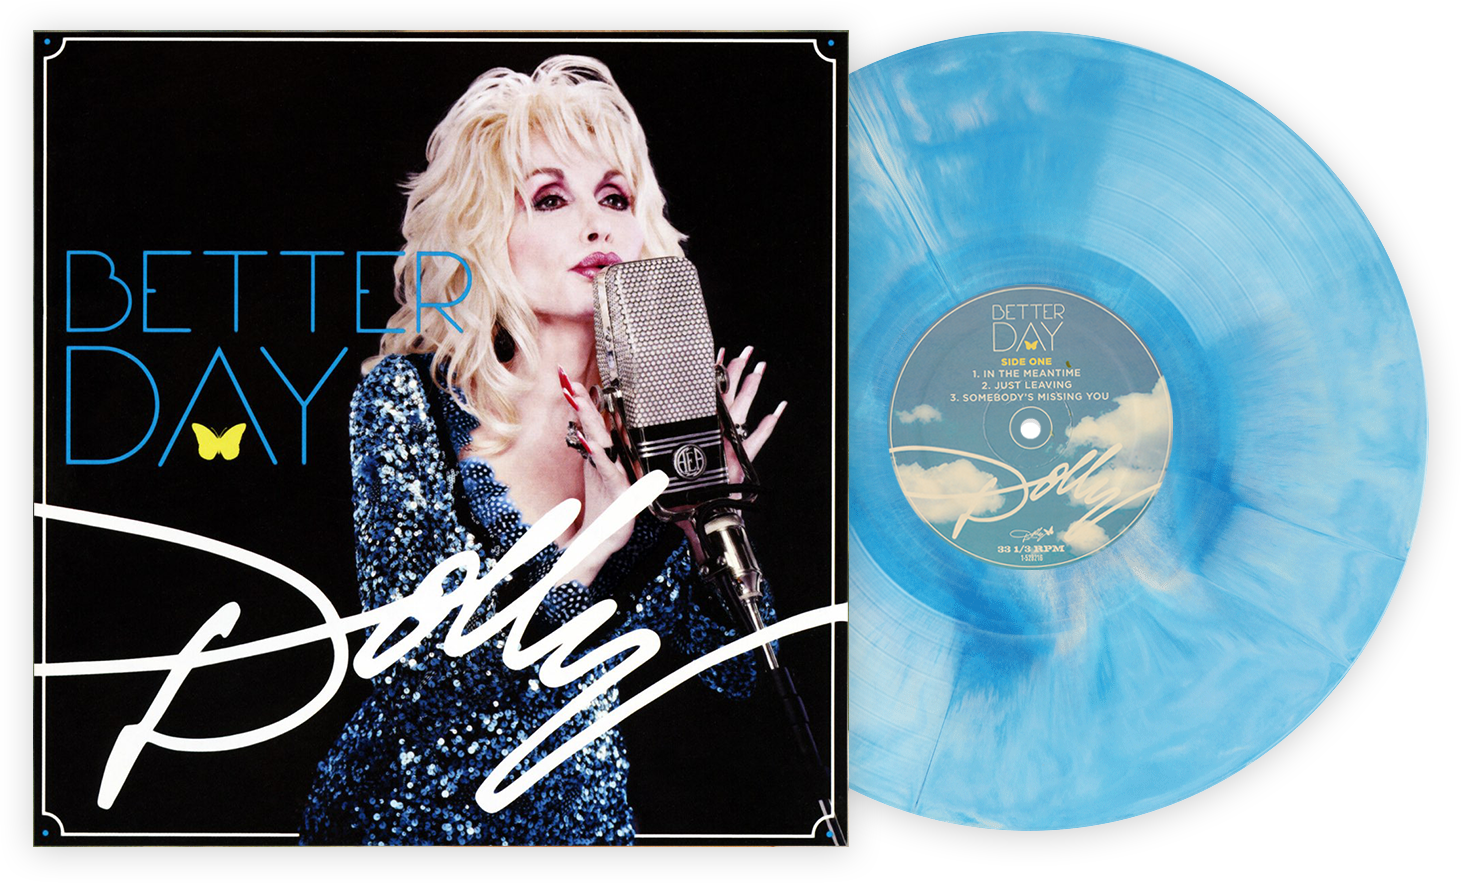 Dolly Record Of The Month Subscription Coming To Vinyl Me, Please 